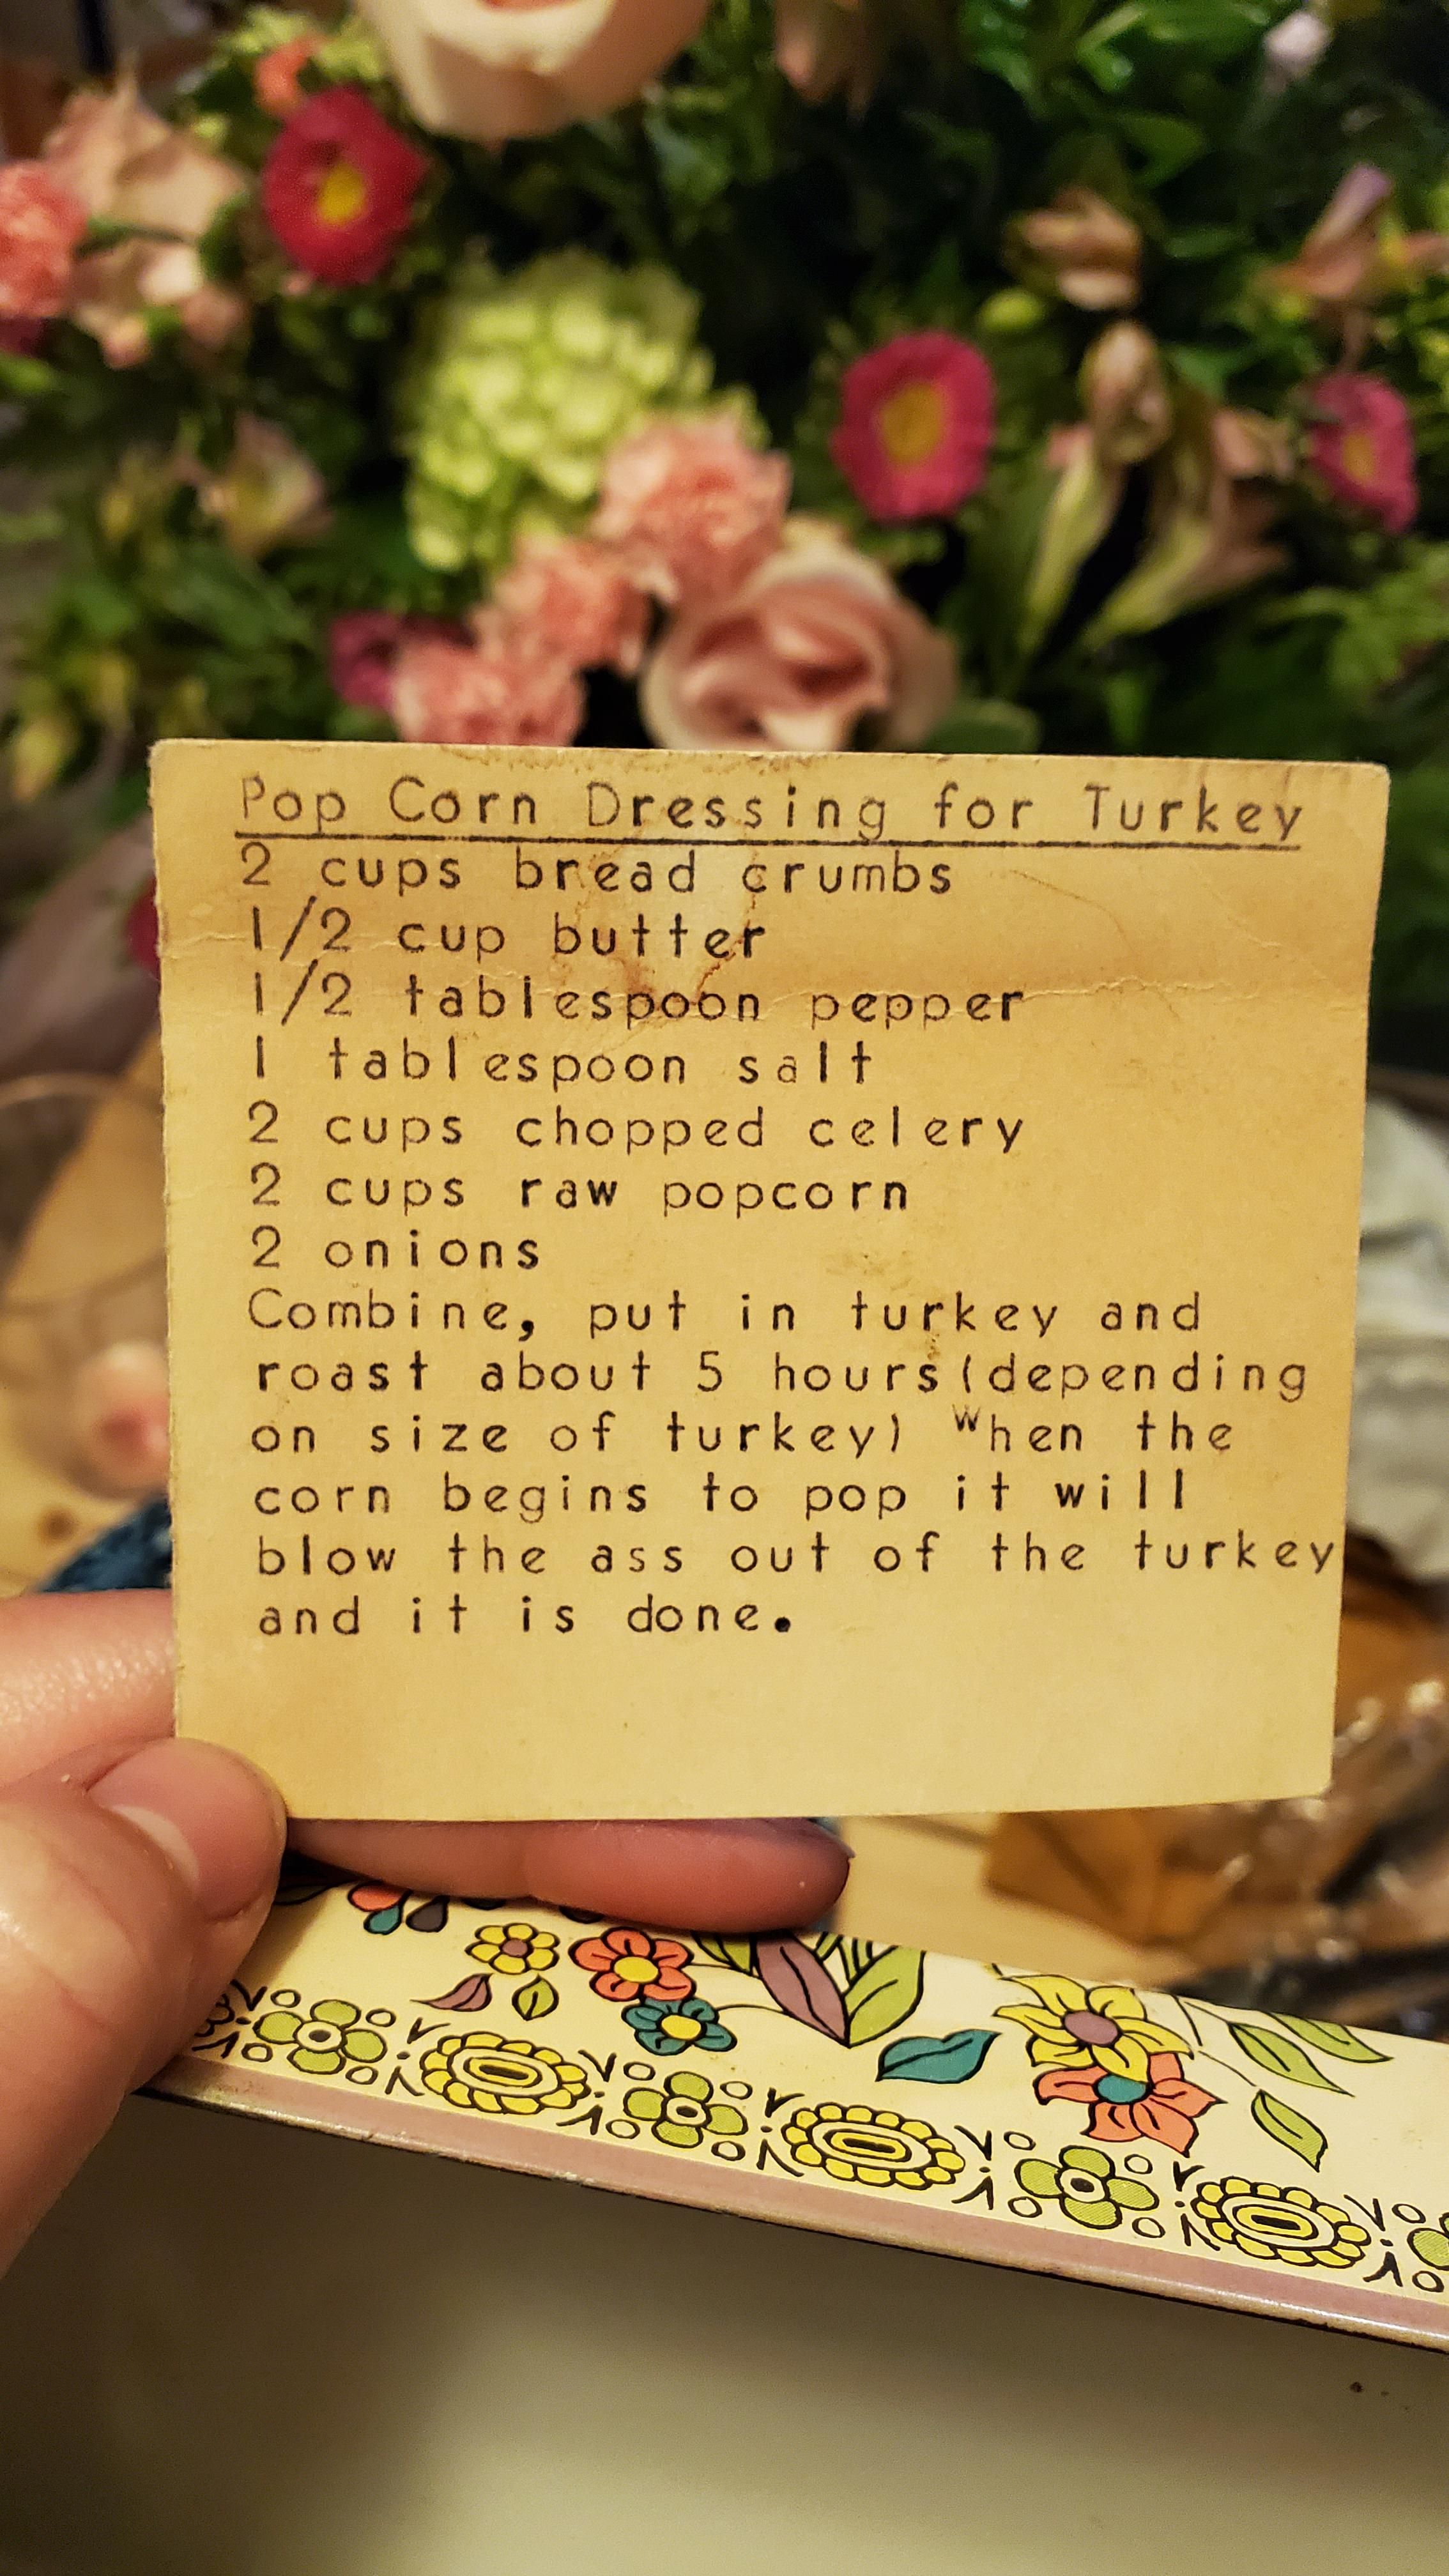 Found this with my grandmother's recipes after she passed recently.